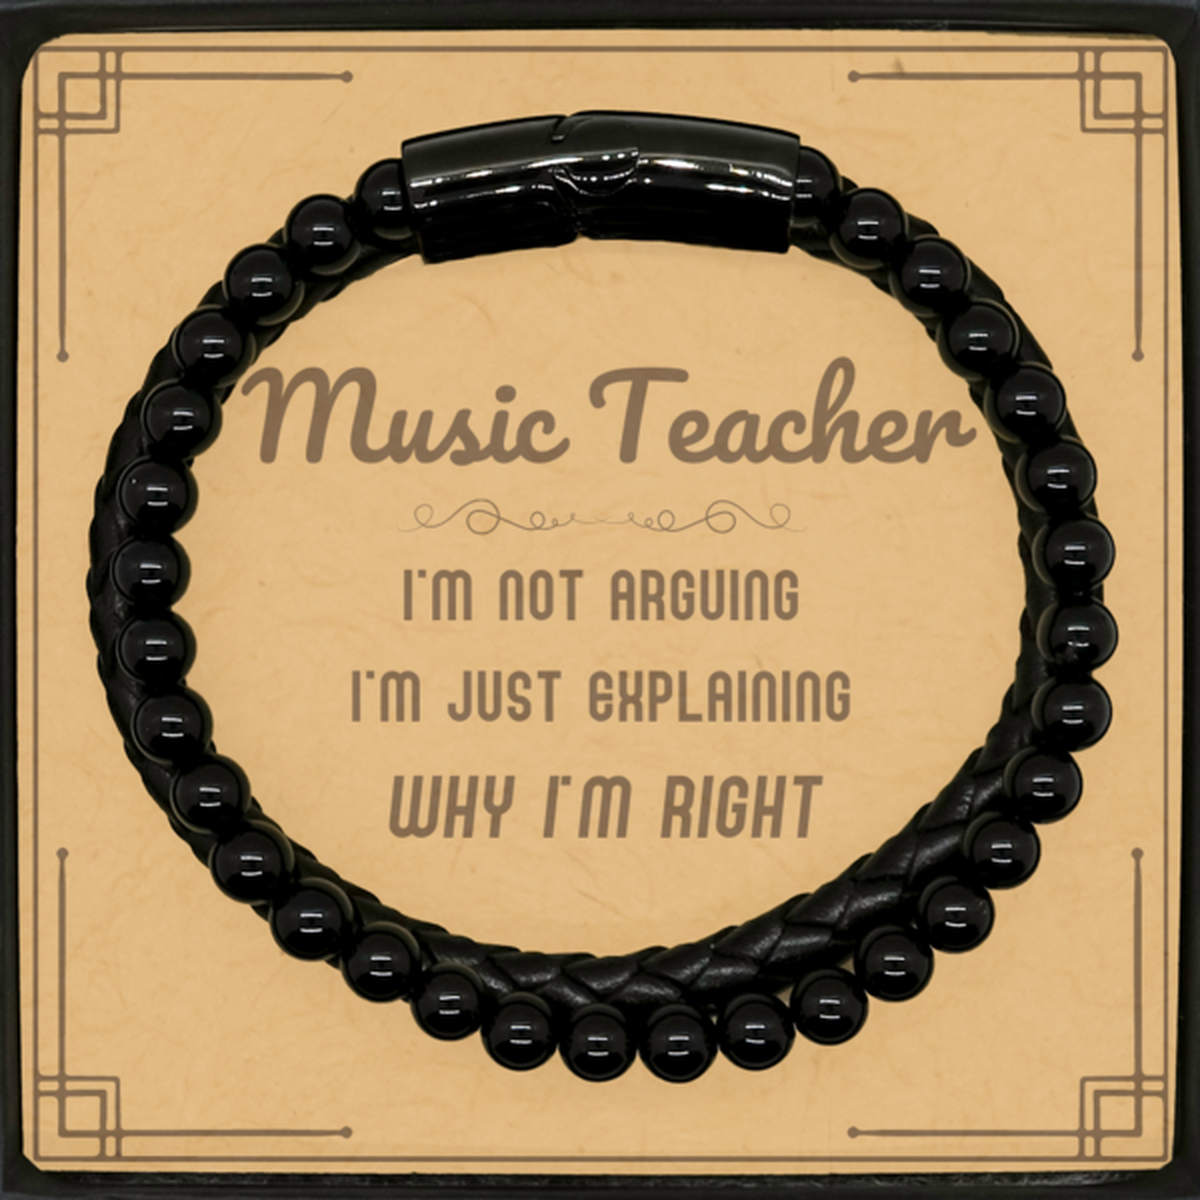 Music Teacher I'm not Arguing. I'm Just Explaining Why I'm RIGHT Stone Leather Bracelets, Funny Saying Quote Music Teacher Gifts For Music Teacher Message Card Graduation Birthday Christmas Gifts for Men Women Coworker